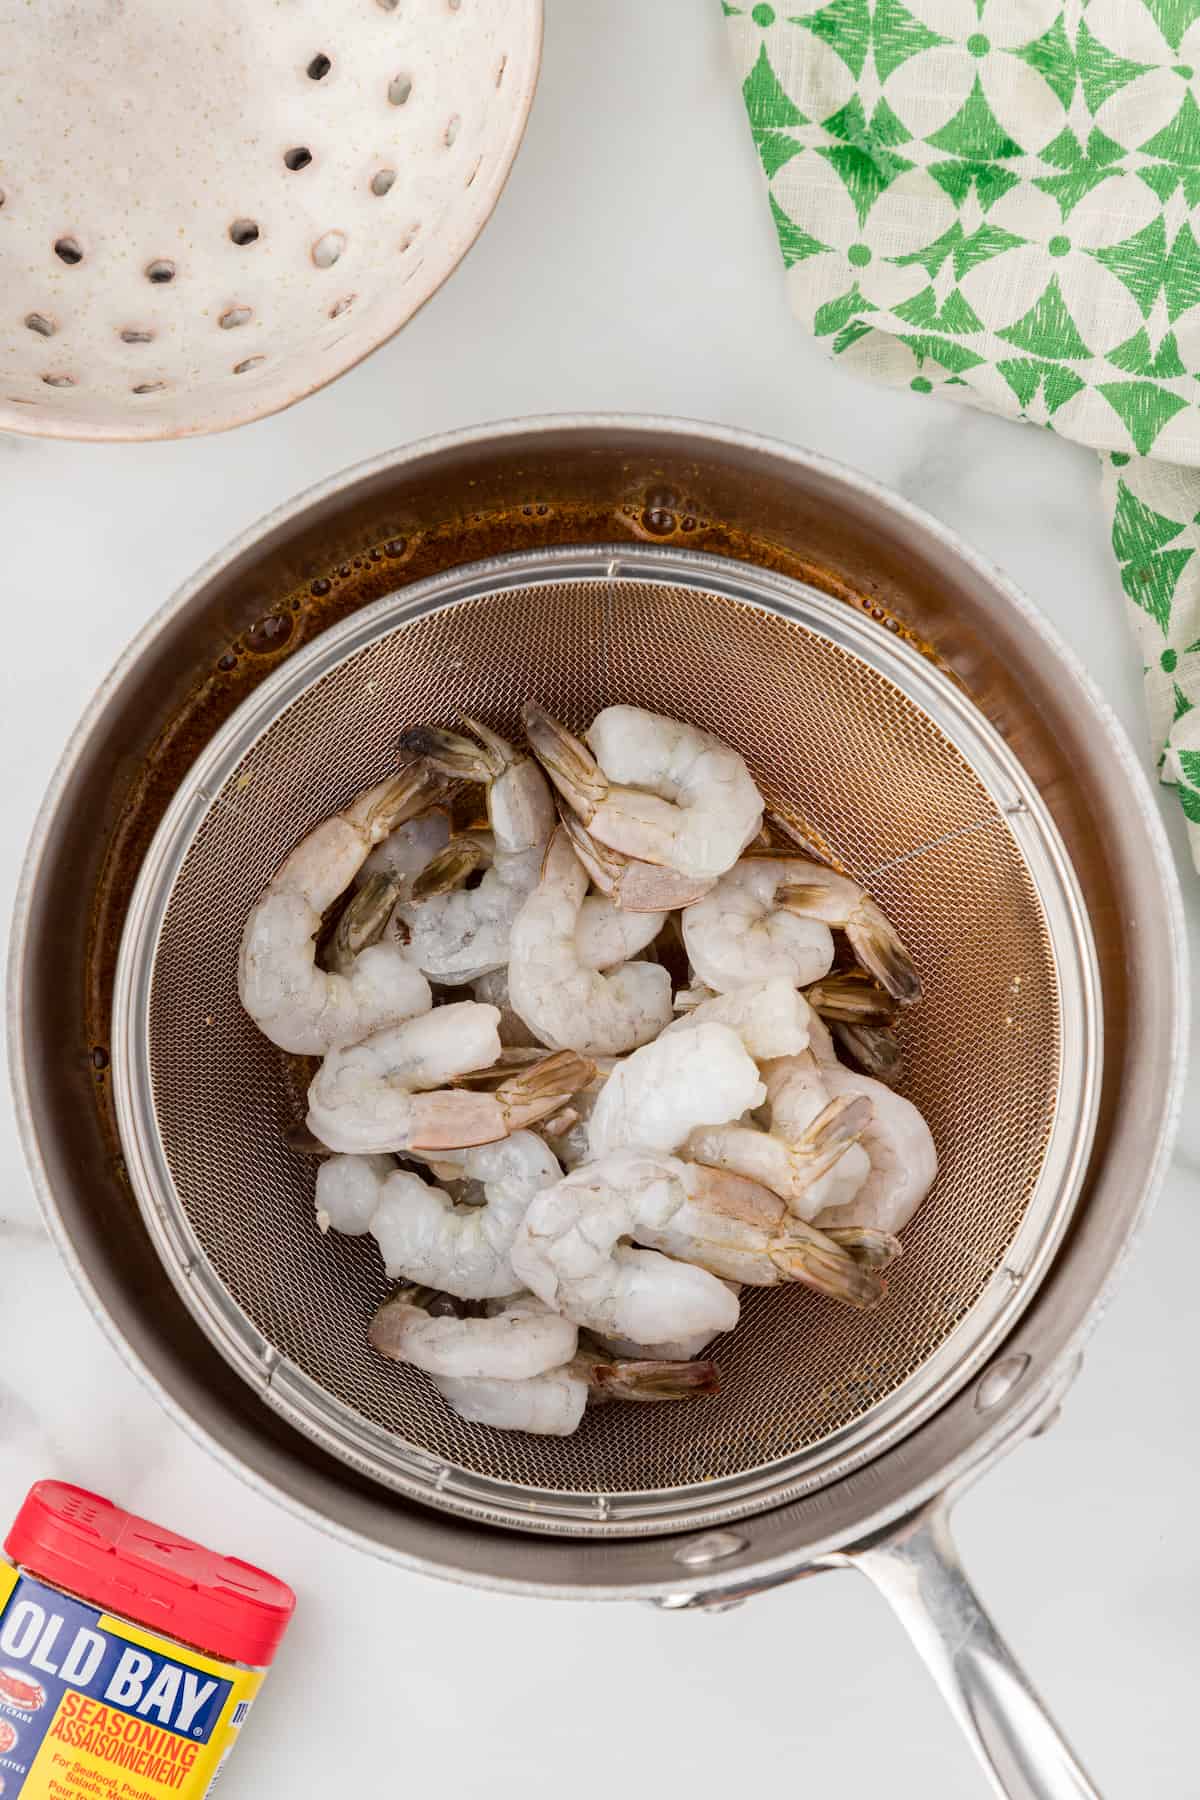 add the raw shrimp to a steamer basket above the water